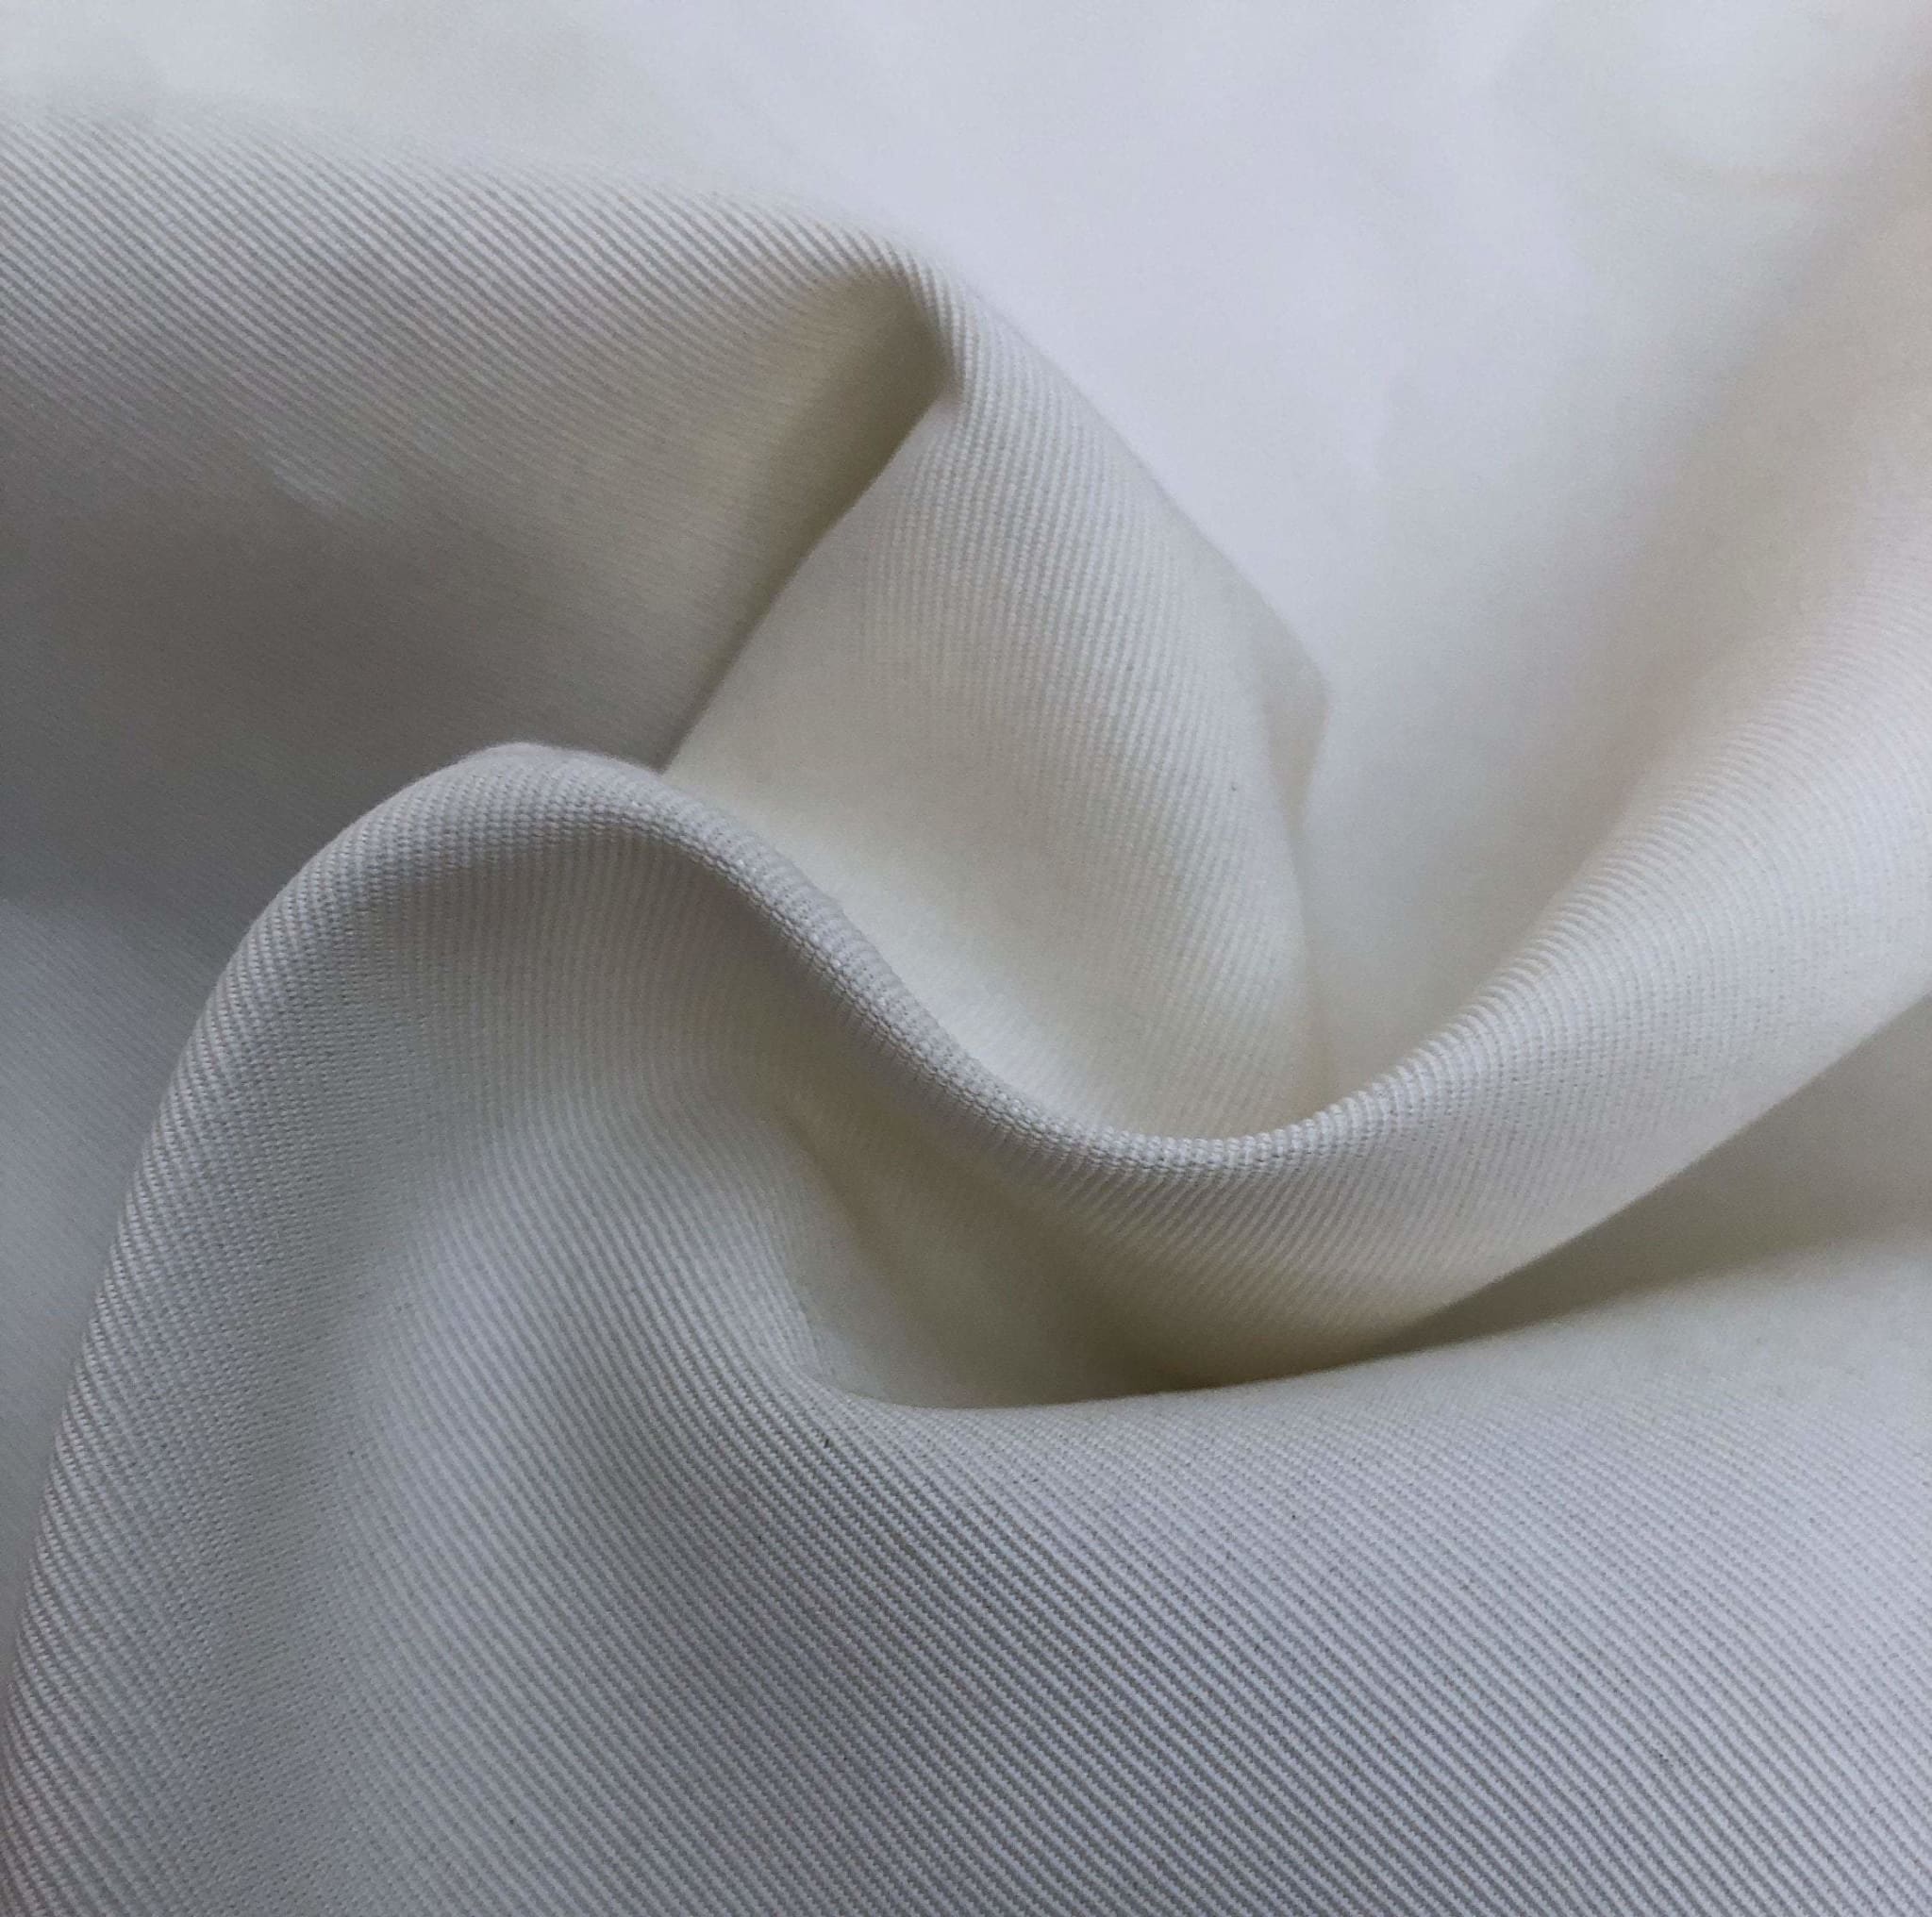 Ben Textiles Inc. 60'' Poly Poplin White, Fabric by The Yard : :  Home